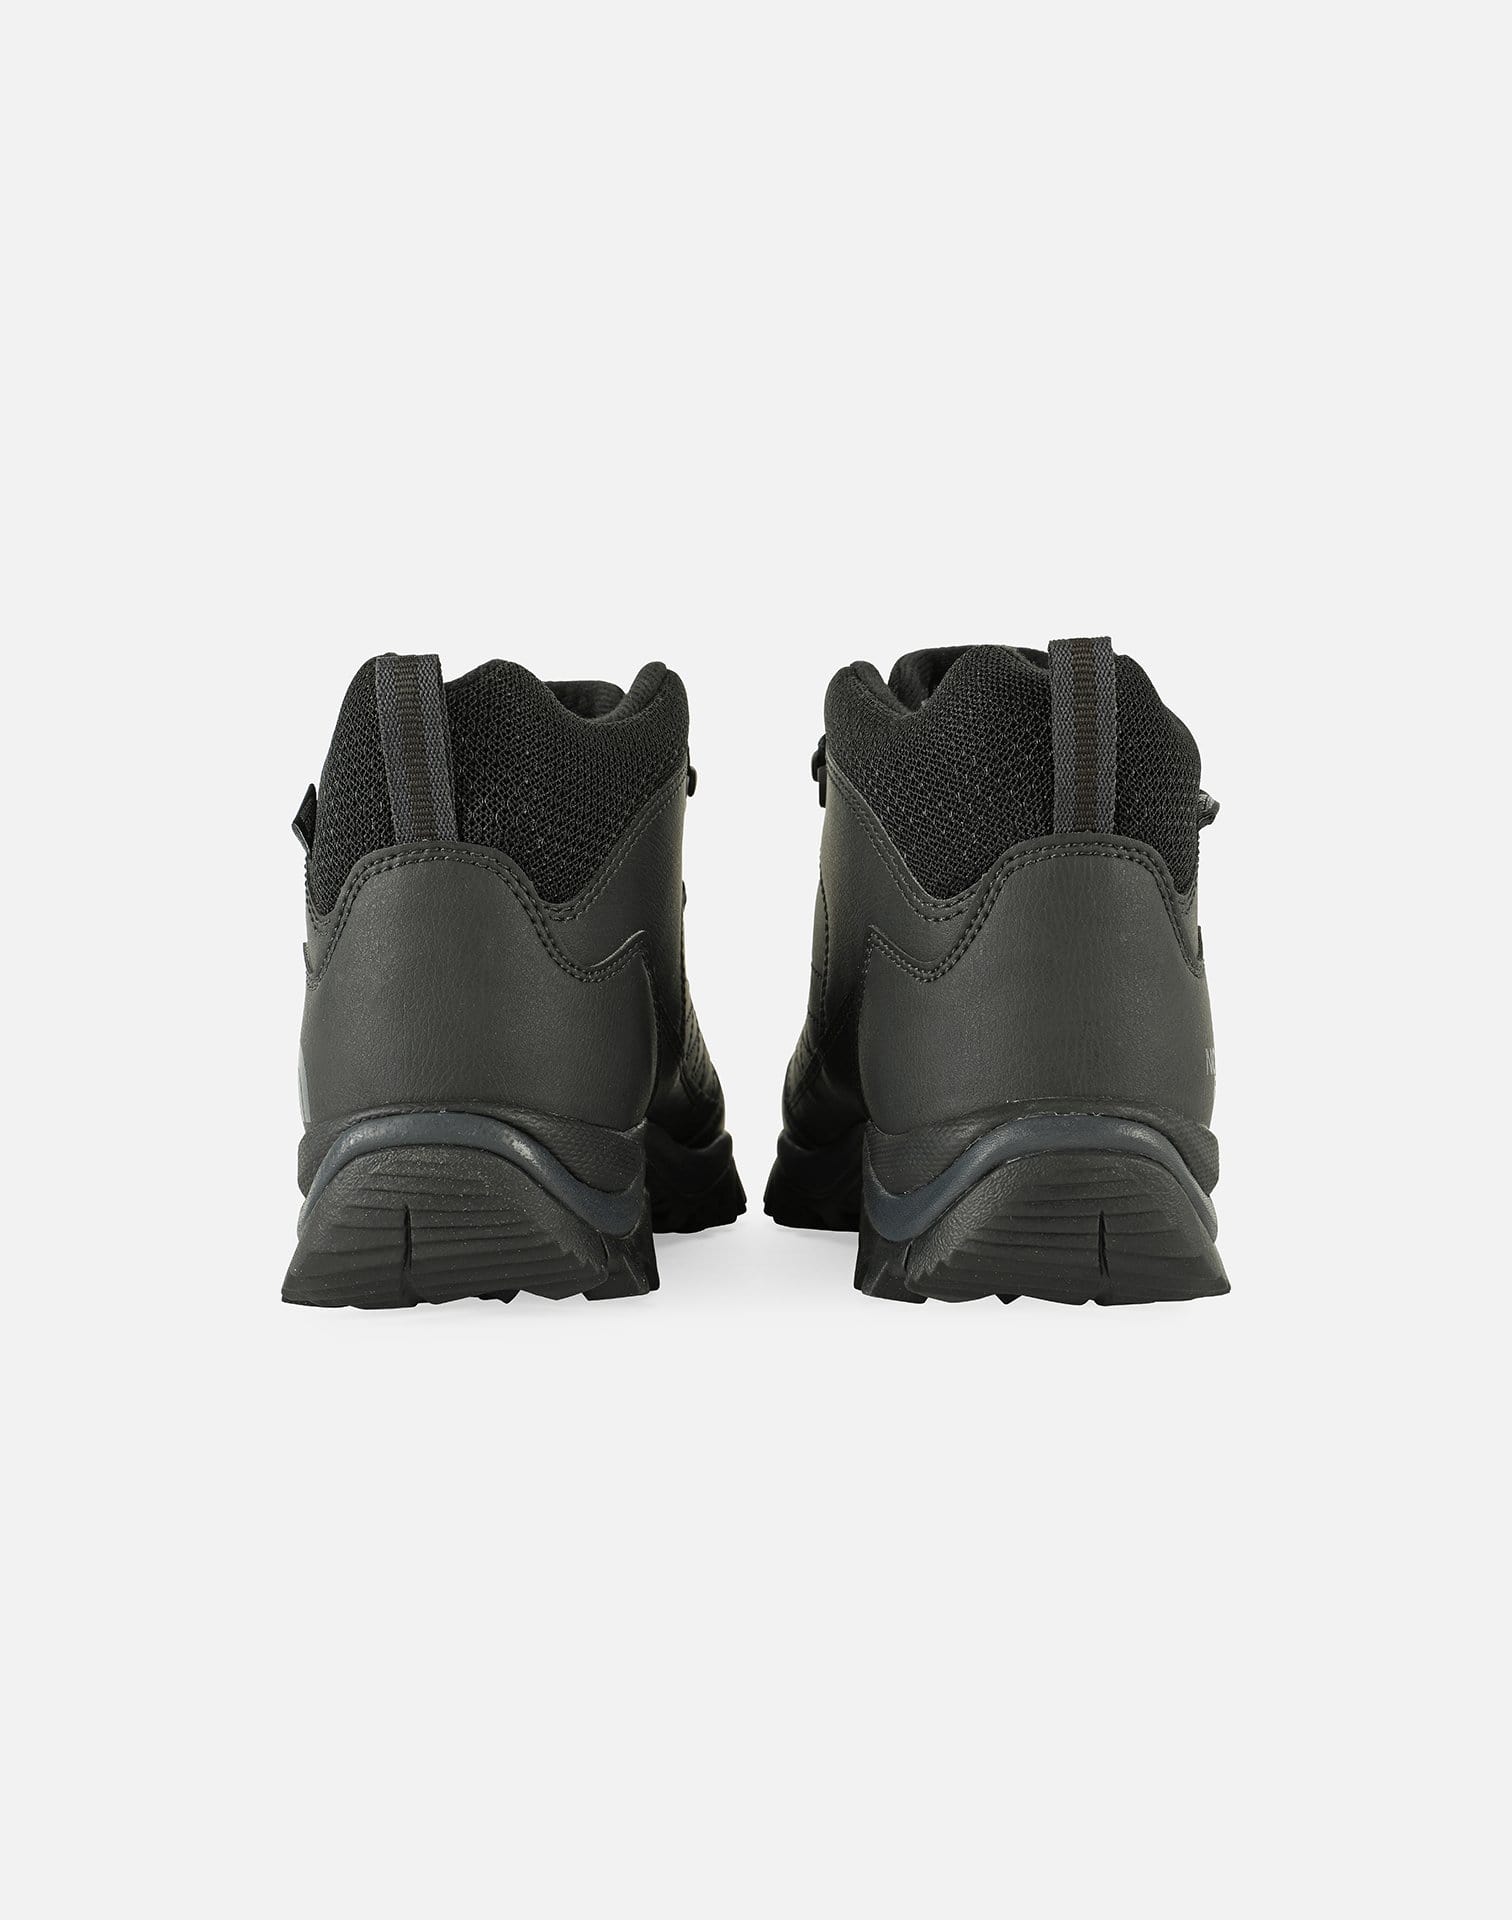 The North Face Men's Storm Strike 2 Waterproof Boots